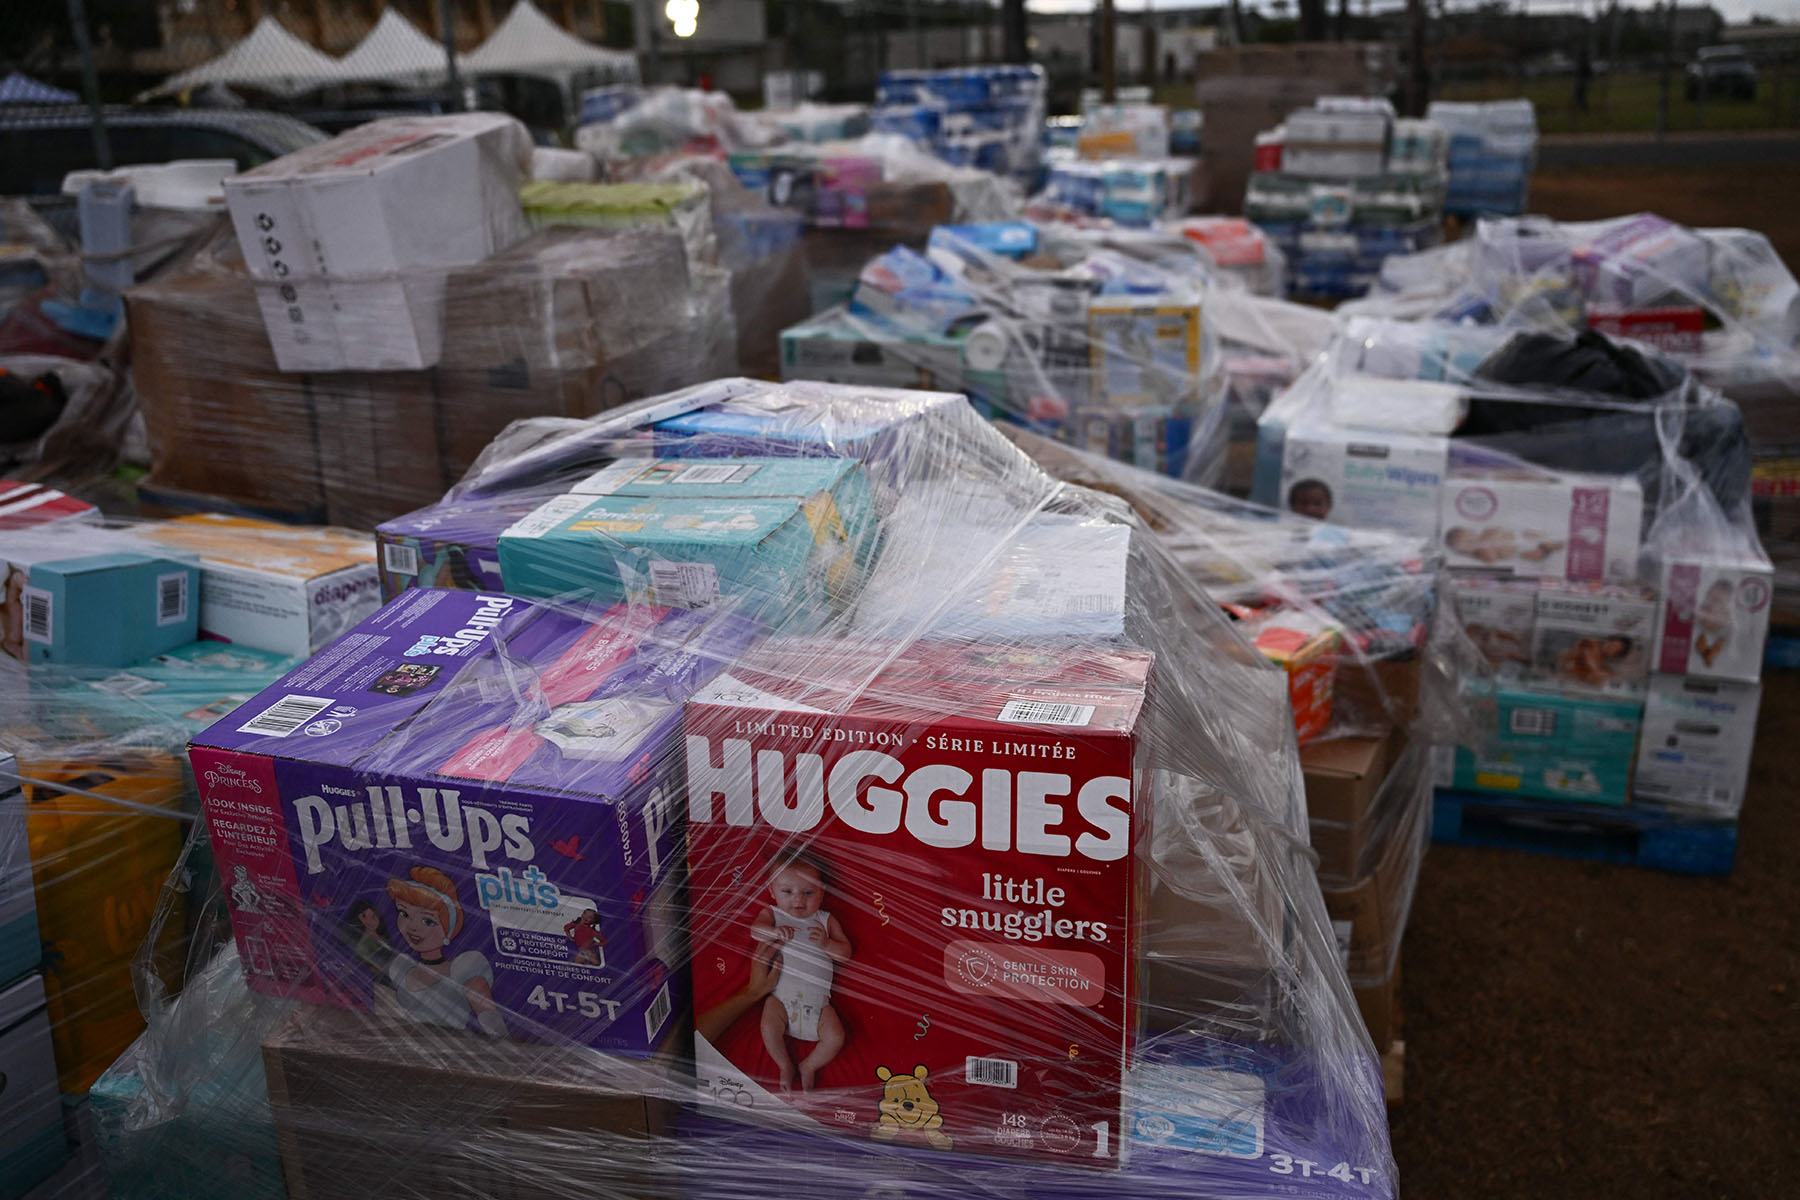 Donated goods including diapers await distribution outside of a shelter.